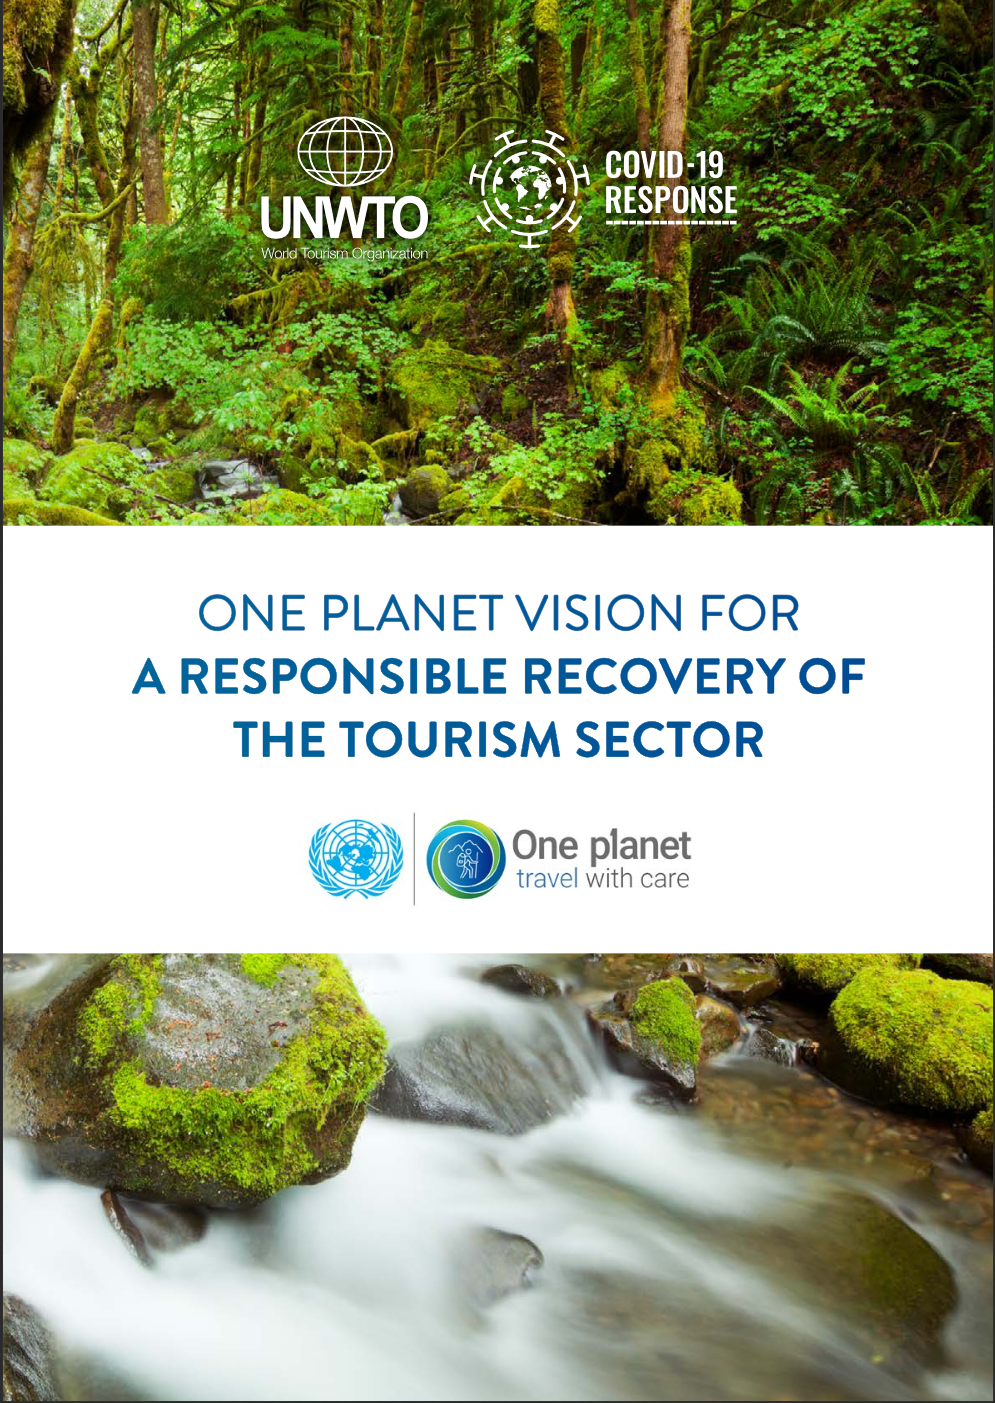 Responsible recovery of tourism: The One Planet Vision